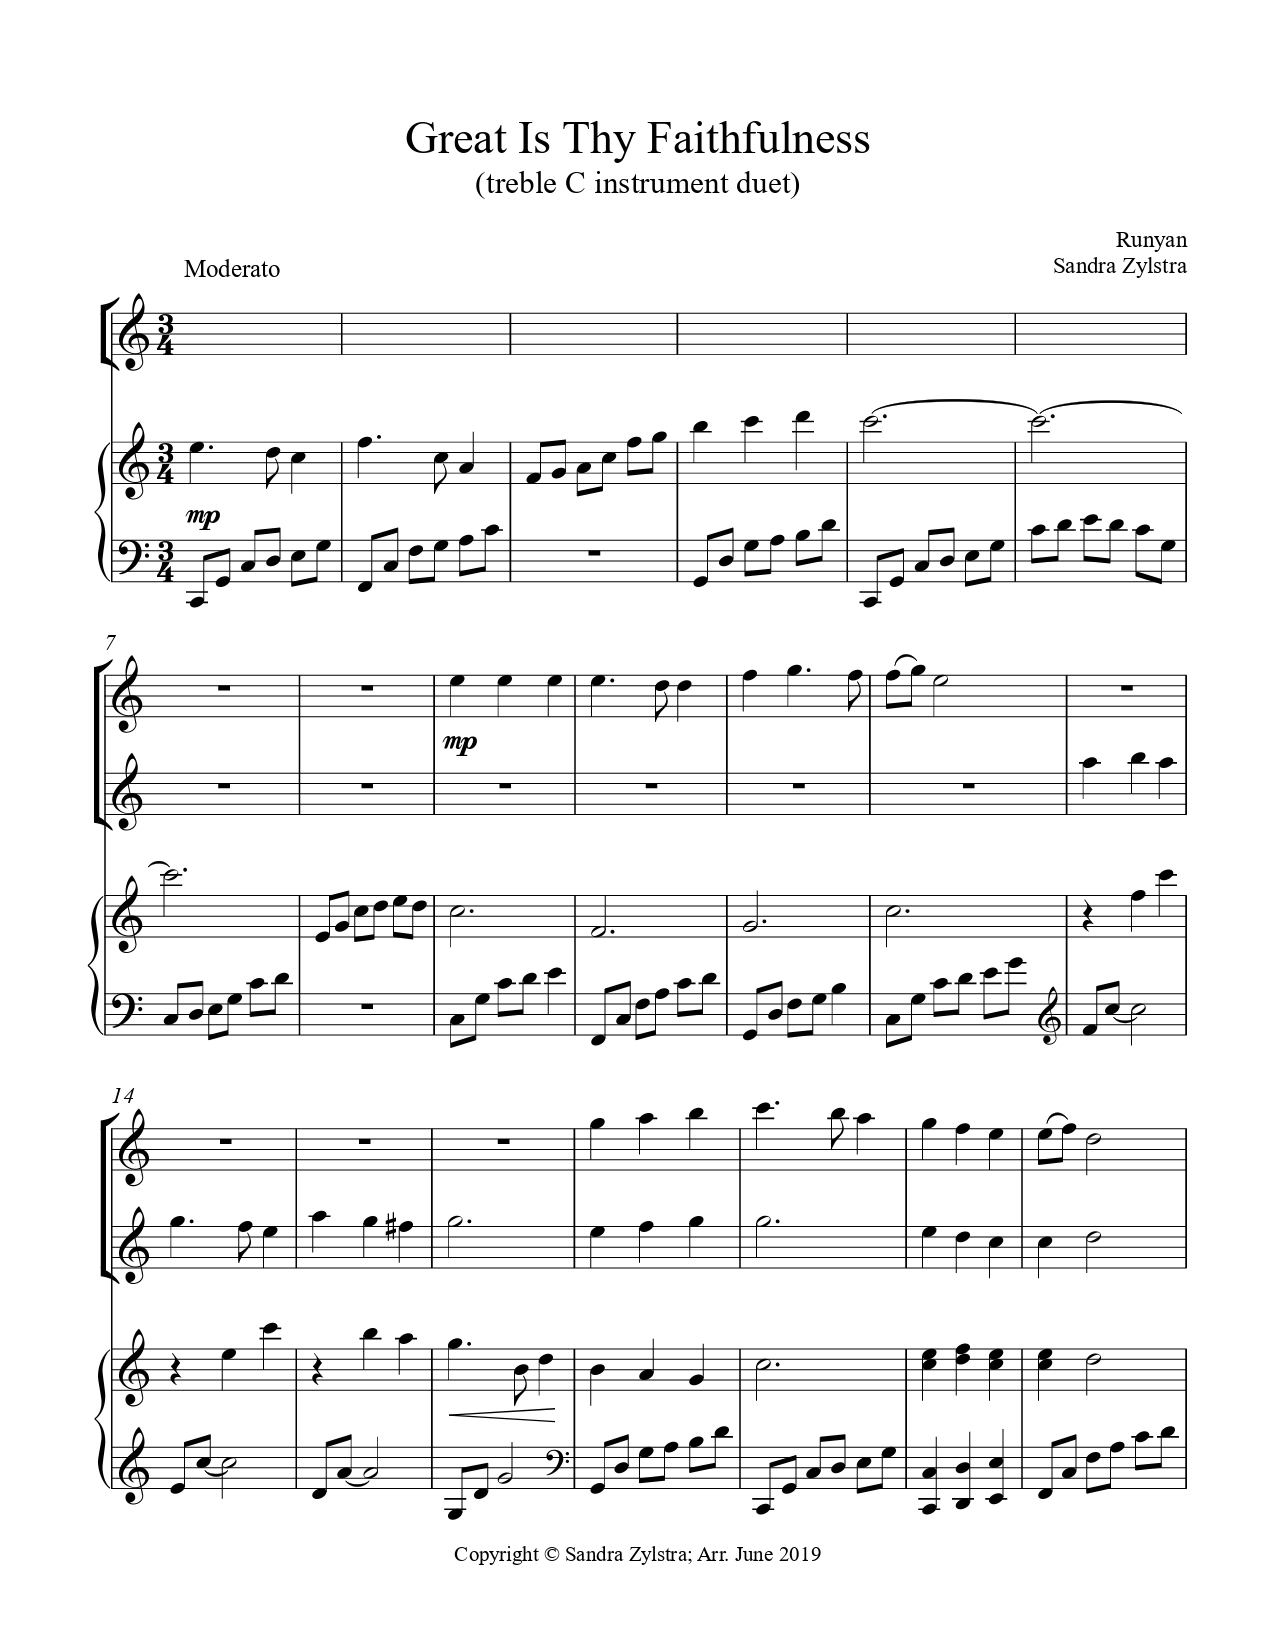 Great Is Thy Faithfulness treble C instrument duet parts cover page 00021